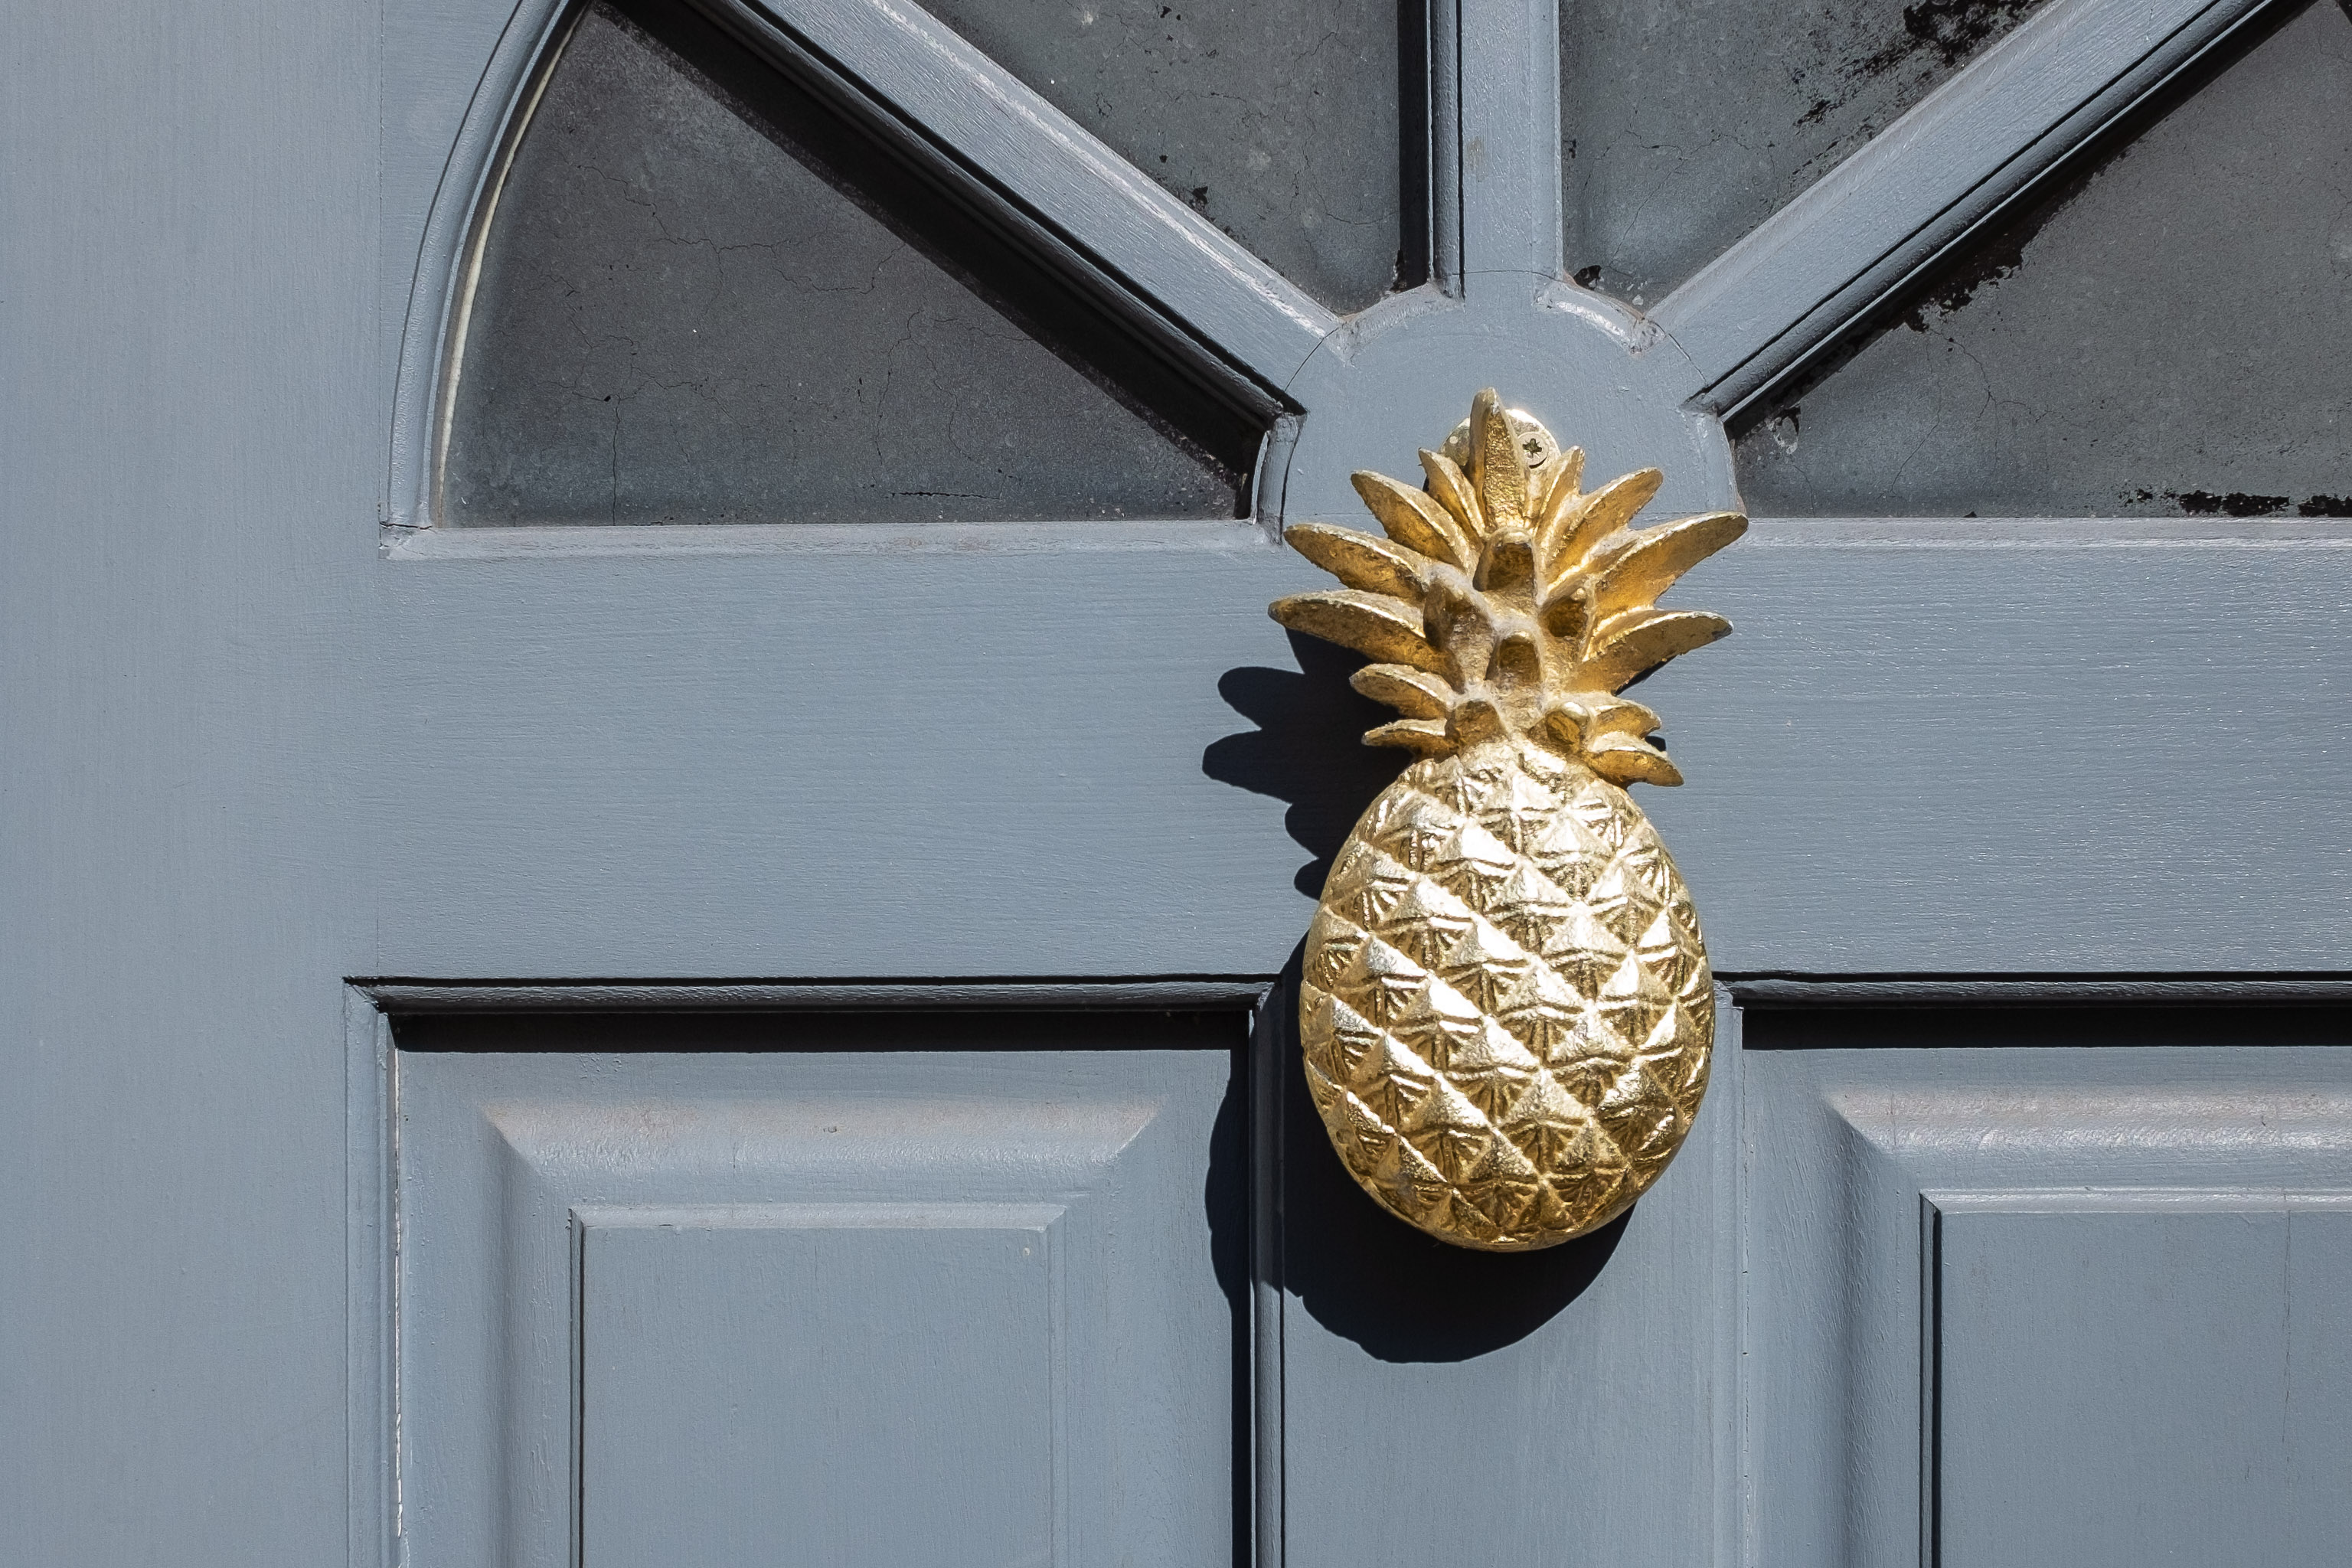 Pineapple
There seems to be quite the tradition of avant-garde knockers in Bemmie.
